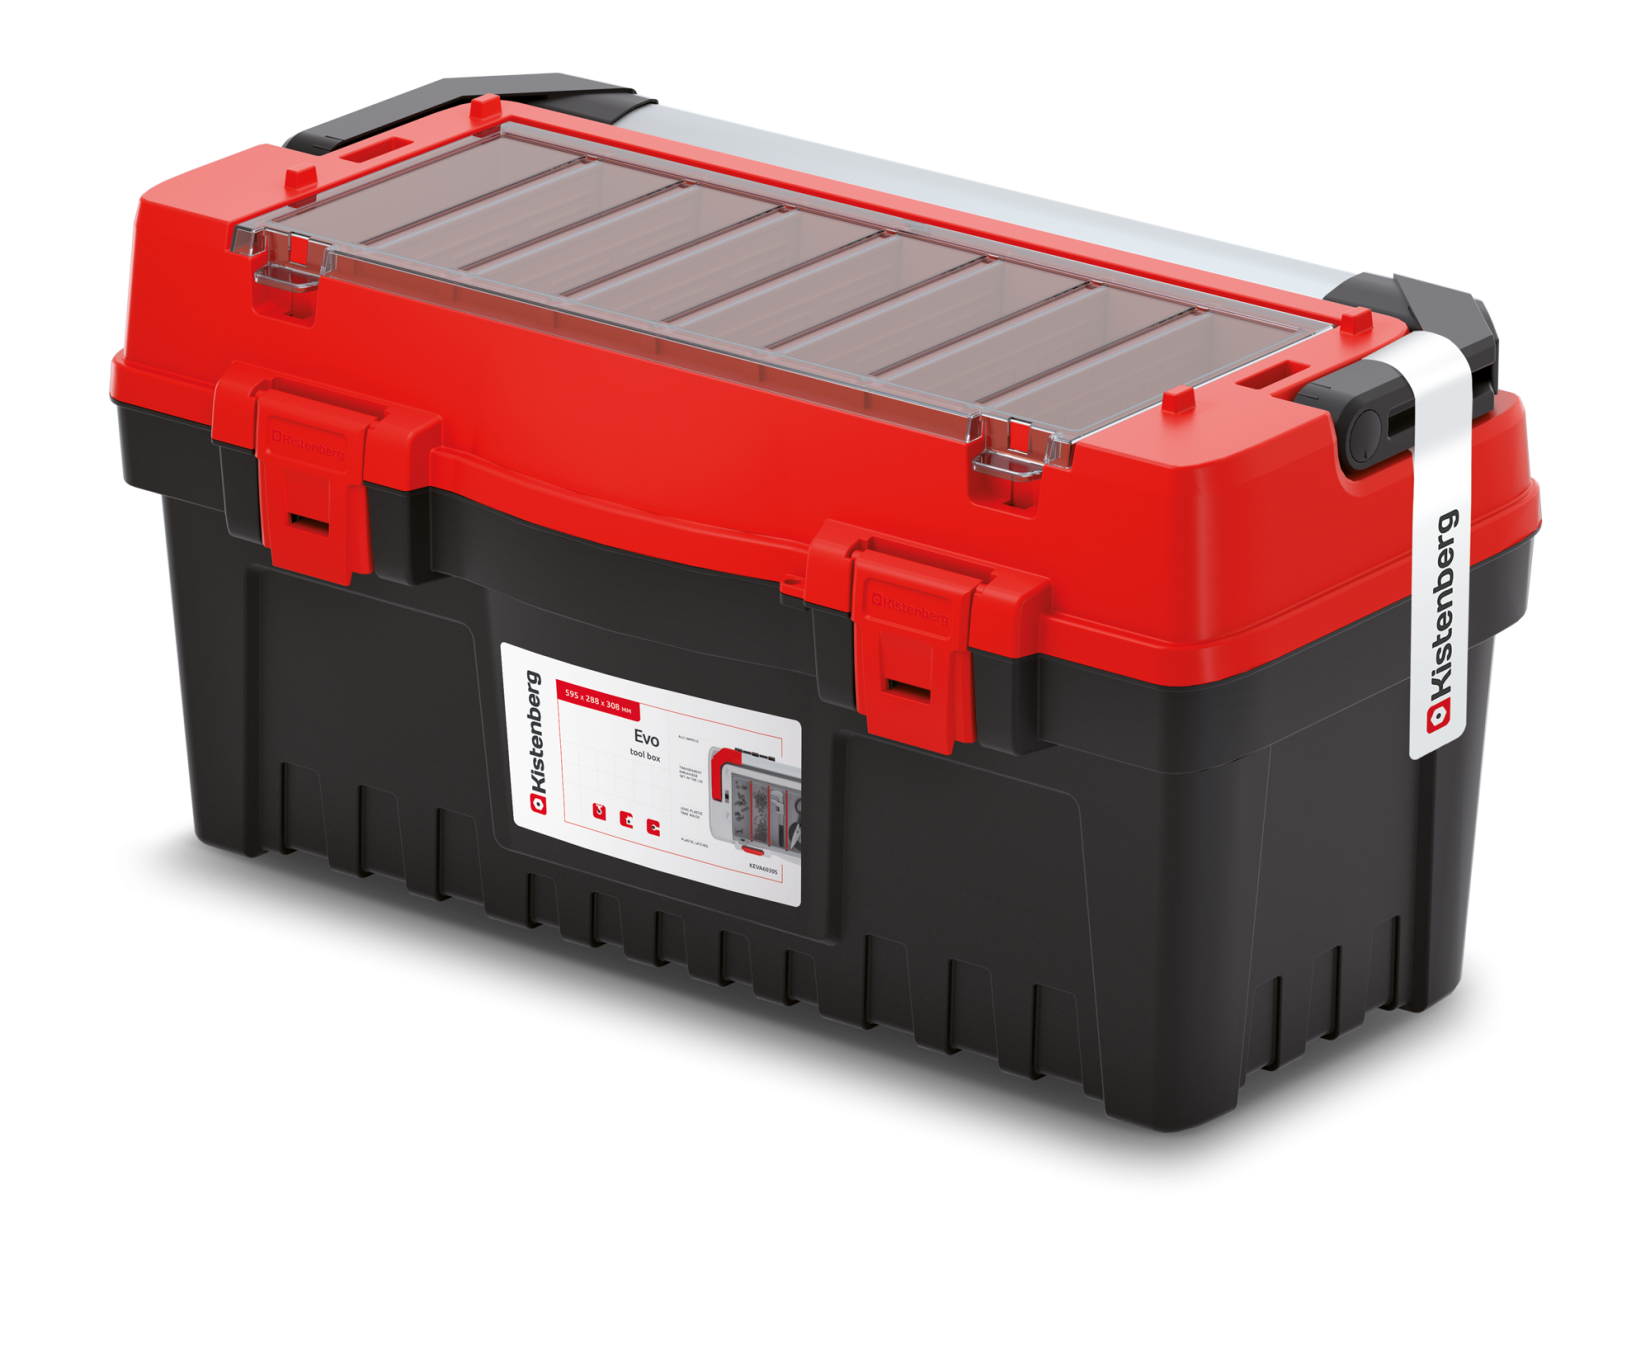 EVO series of toolboxes